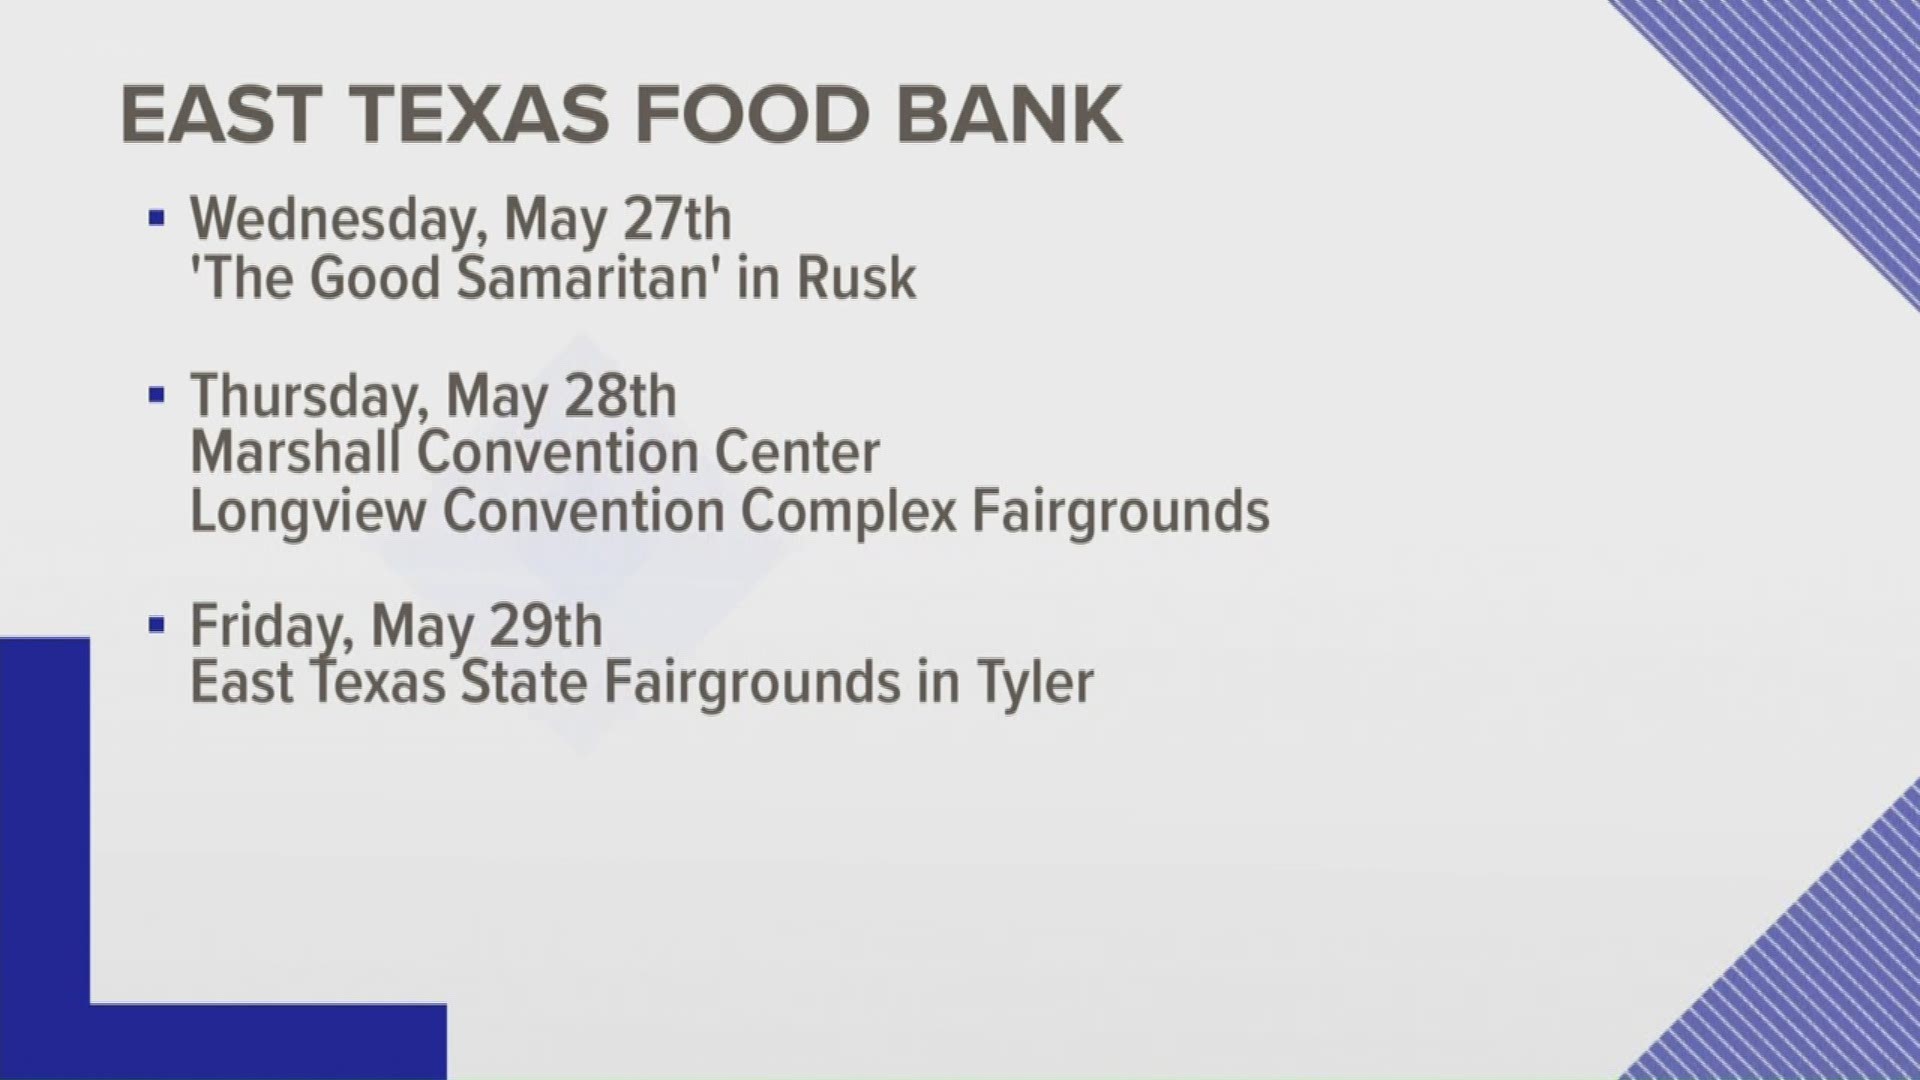 The will be four events in Tyler, Longview, Rusk and Marshall.